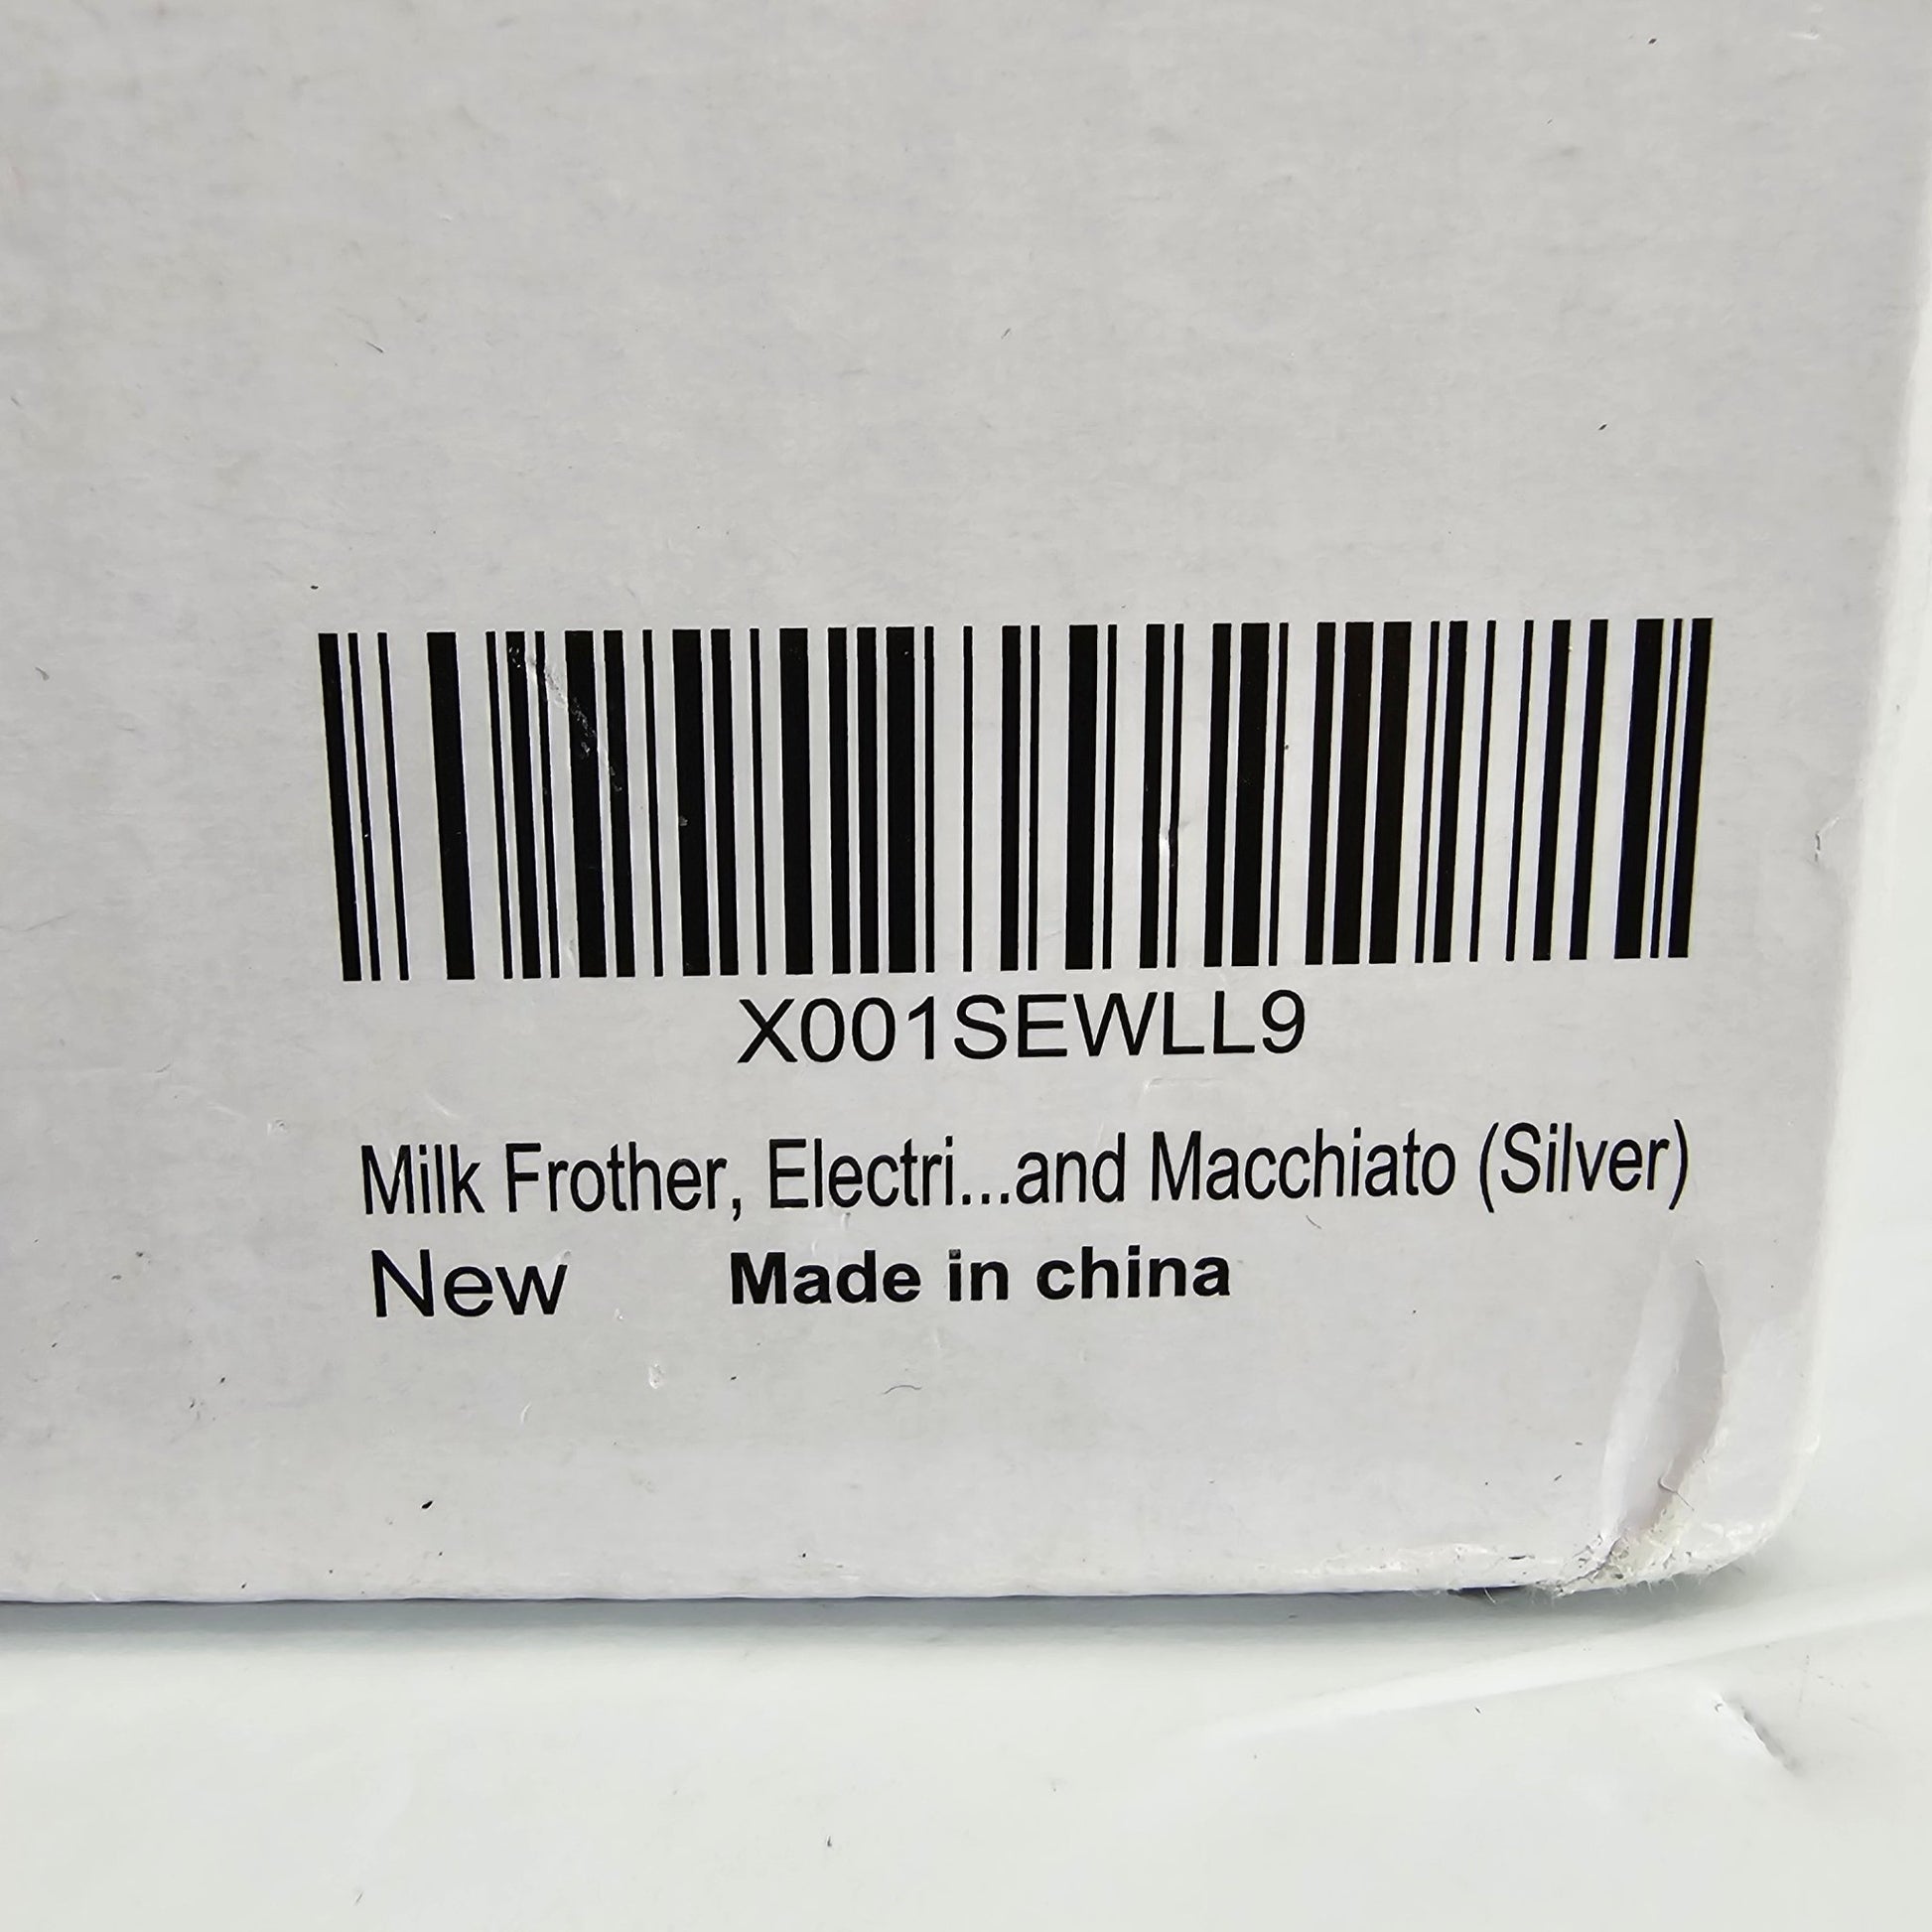 Milk Frother Silver Sayeso MMF-503-V2 - DQ Distribution